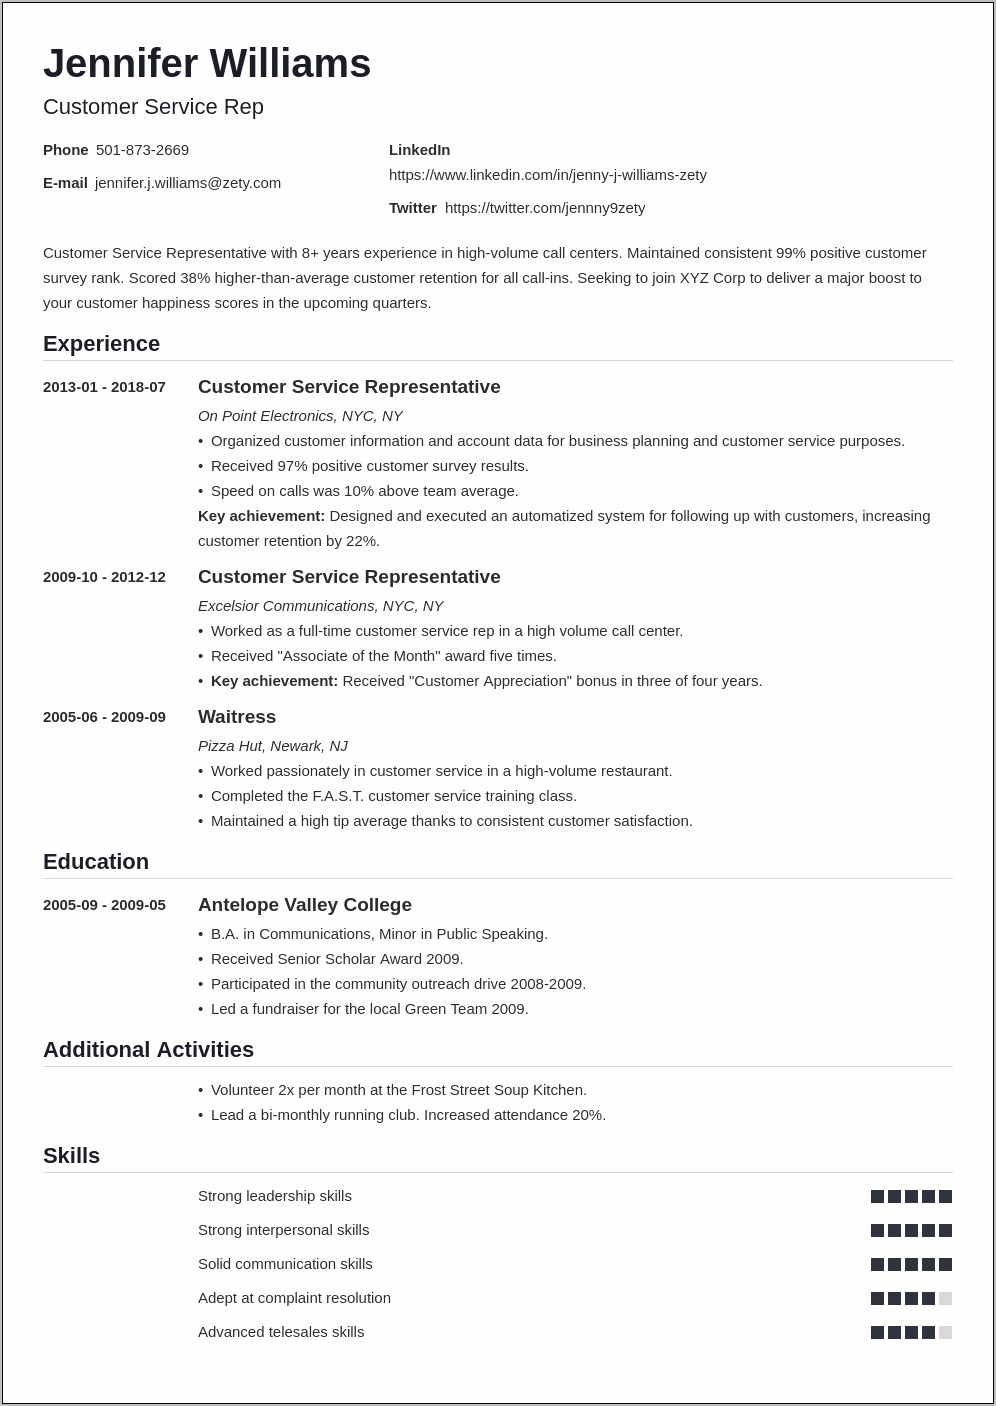 Resume With Photo A Good Or Bad Idea